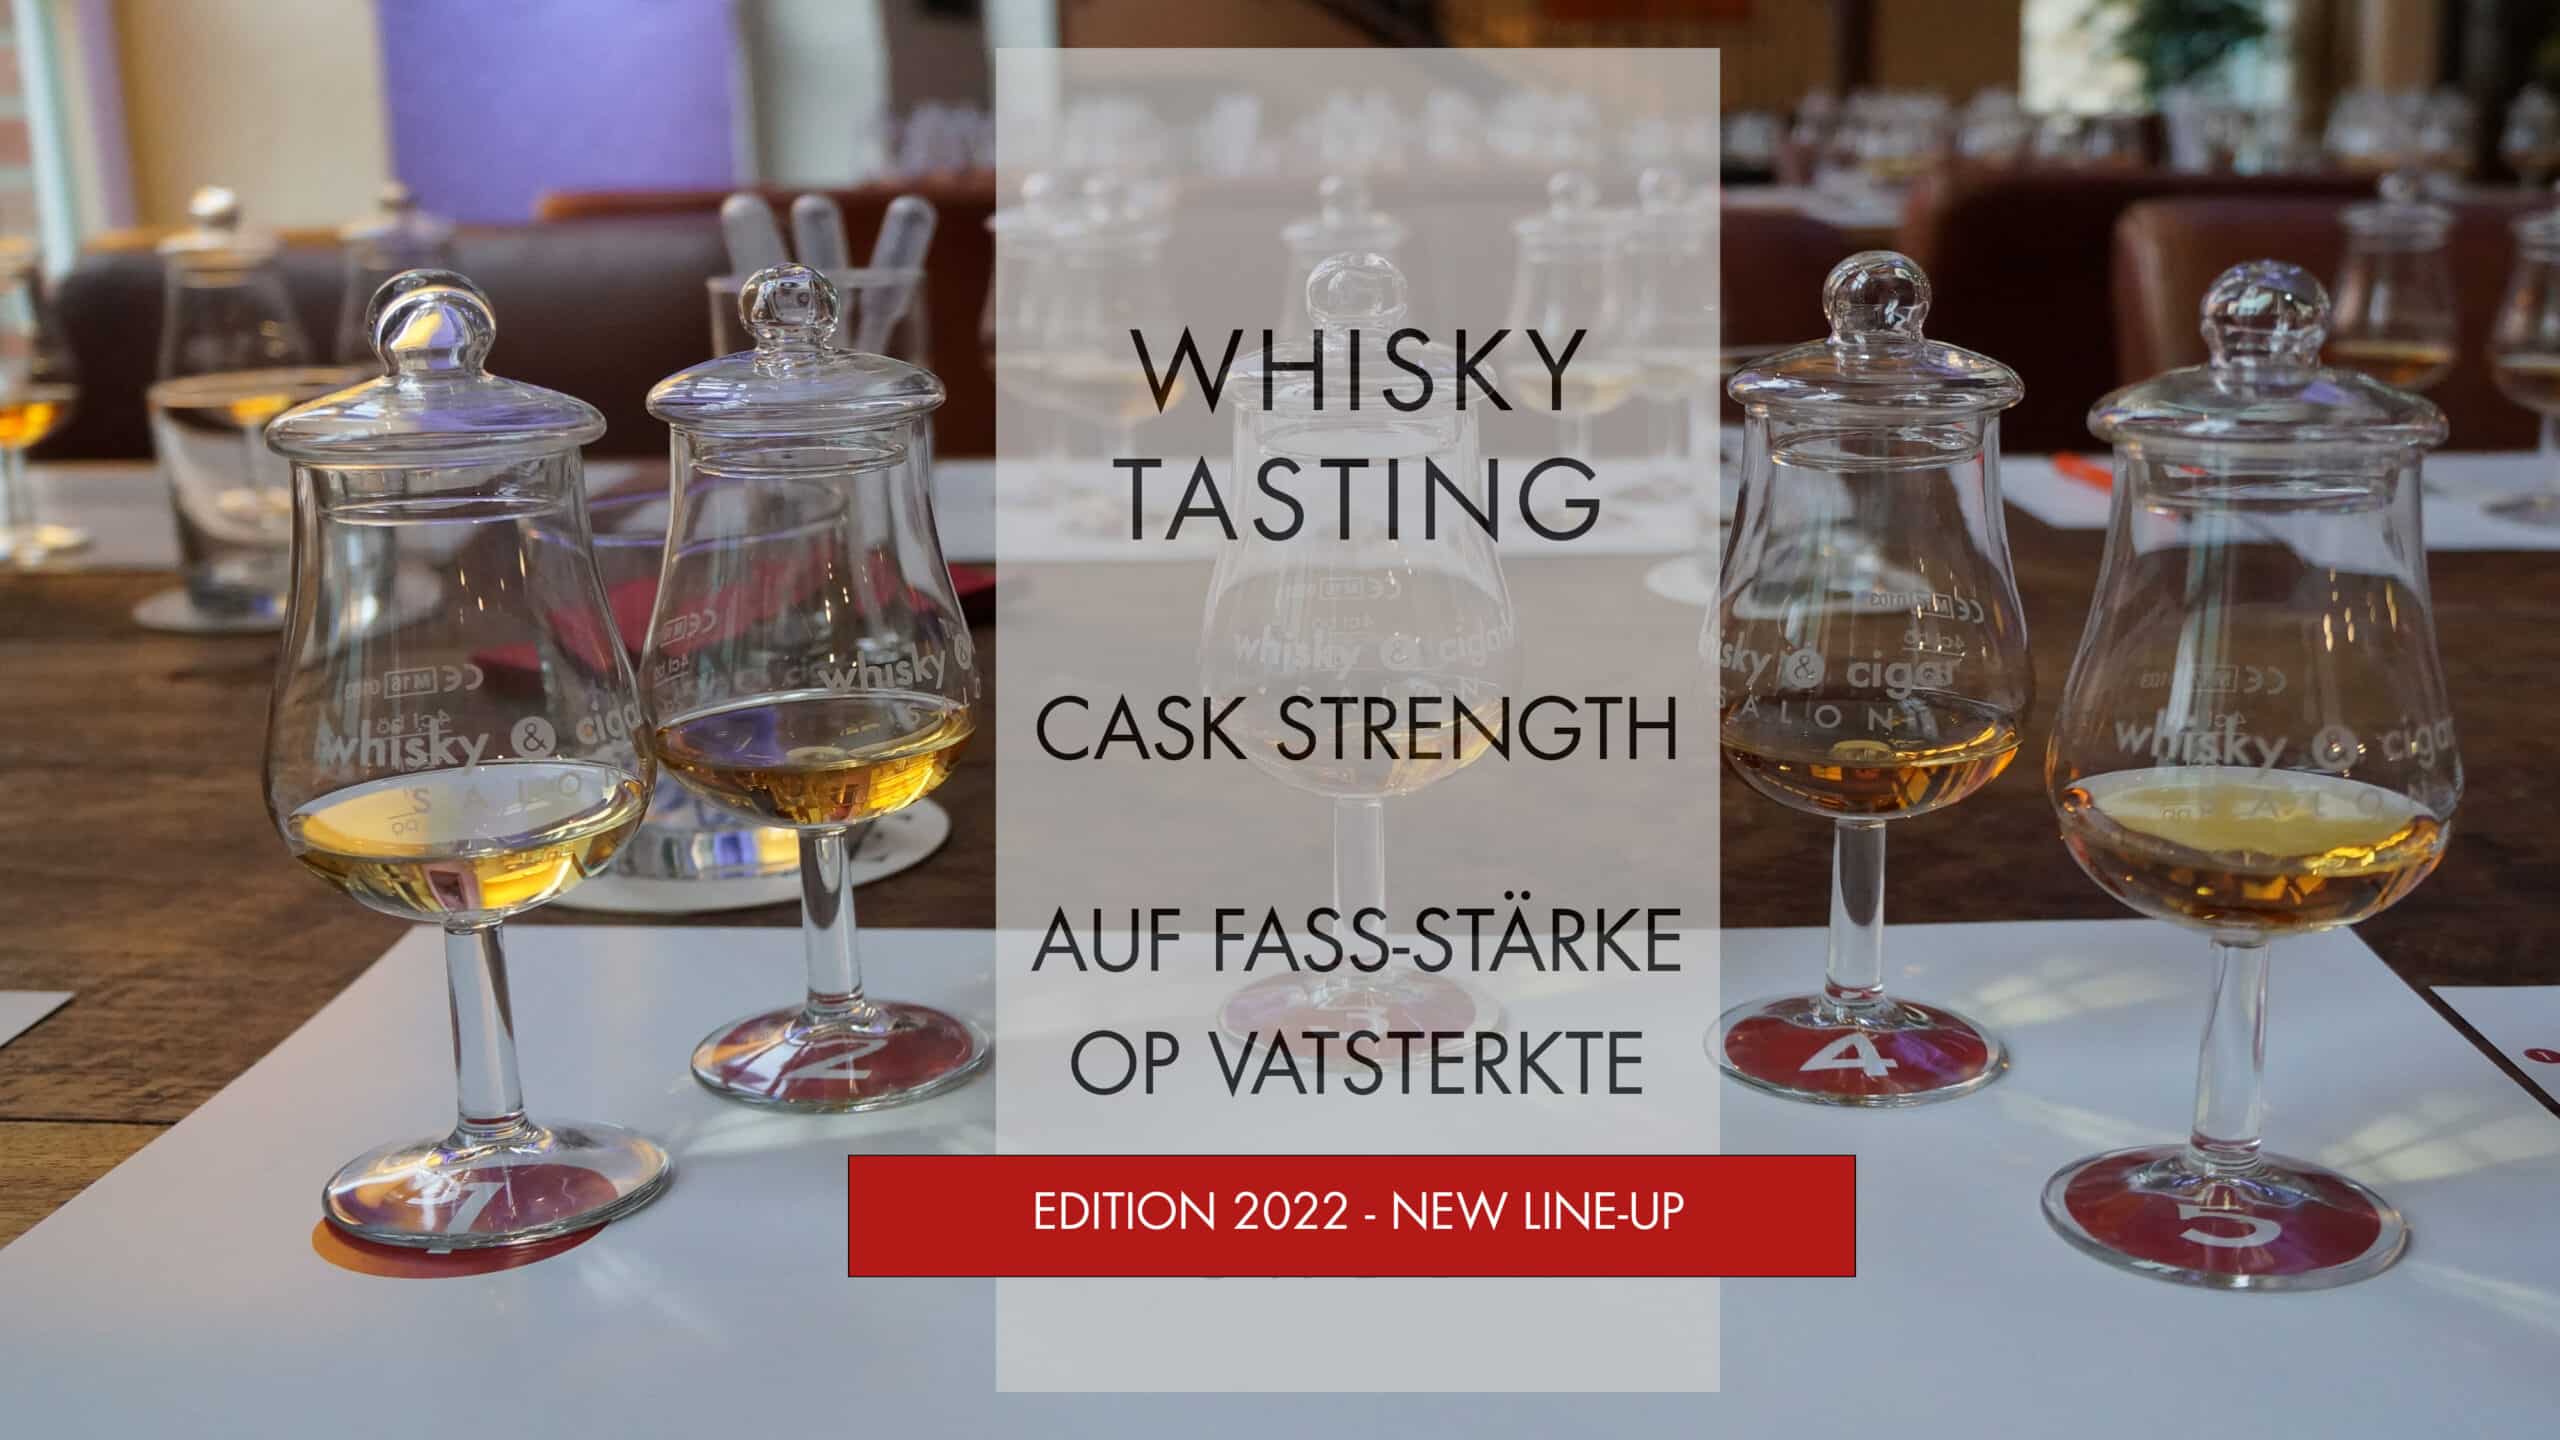 Whisky Tasting Cask-Strength Line-Up Edition 2022